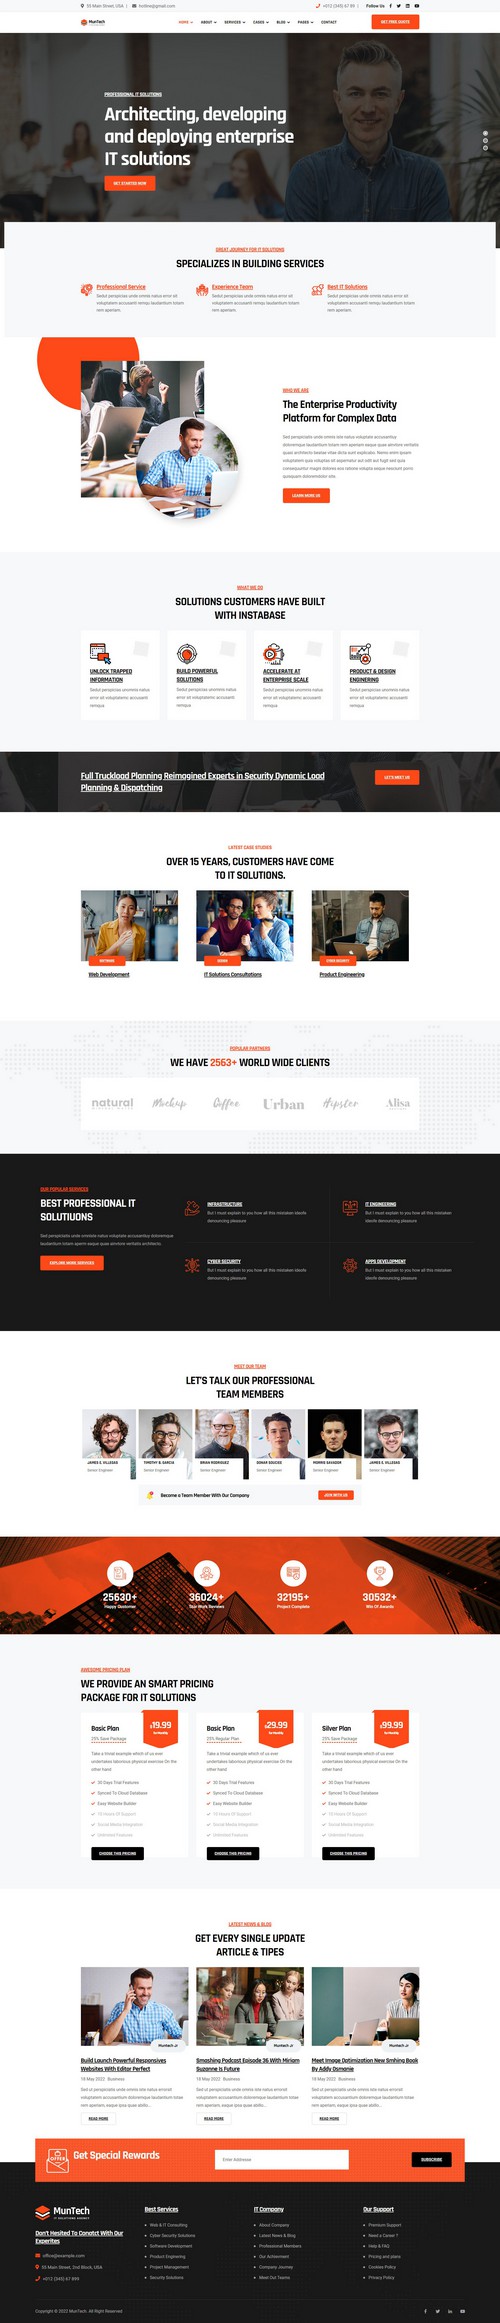 MunTech - IT Solutions and Company Services Joomla Template